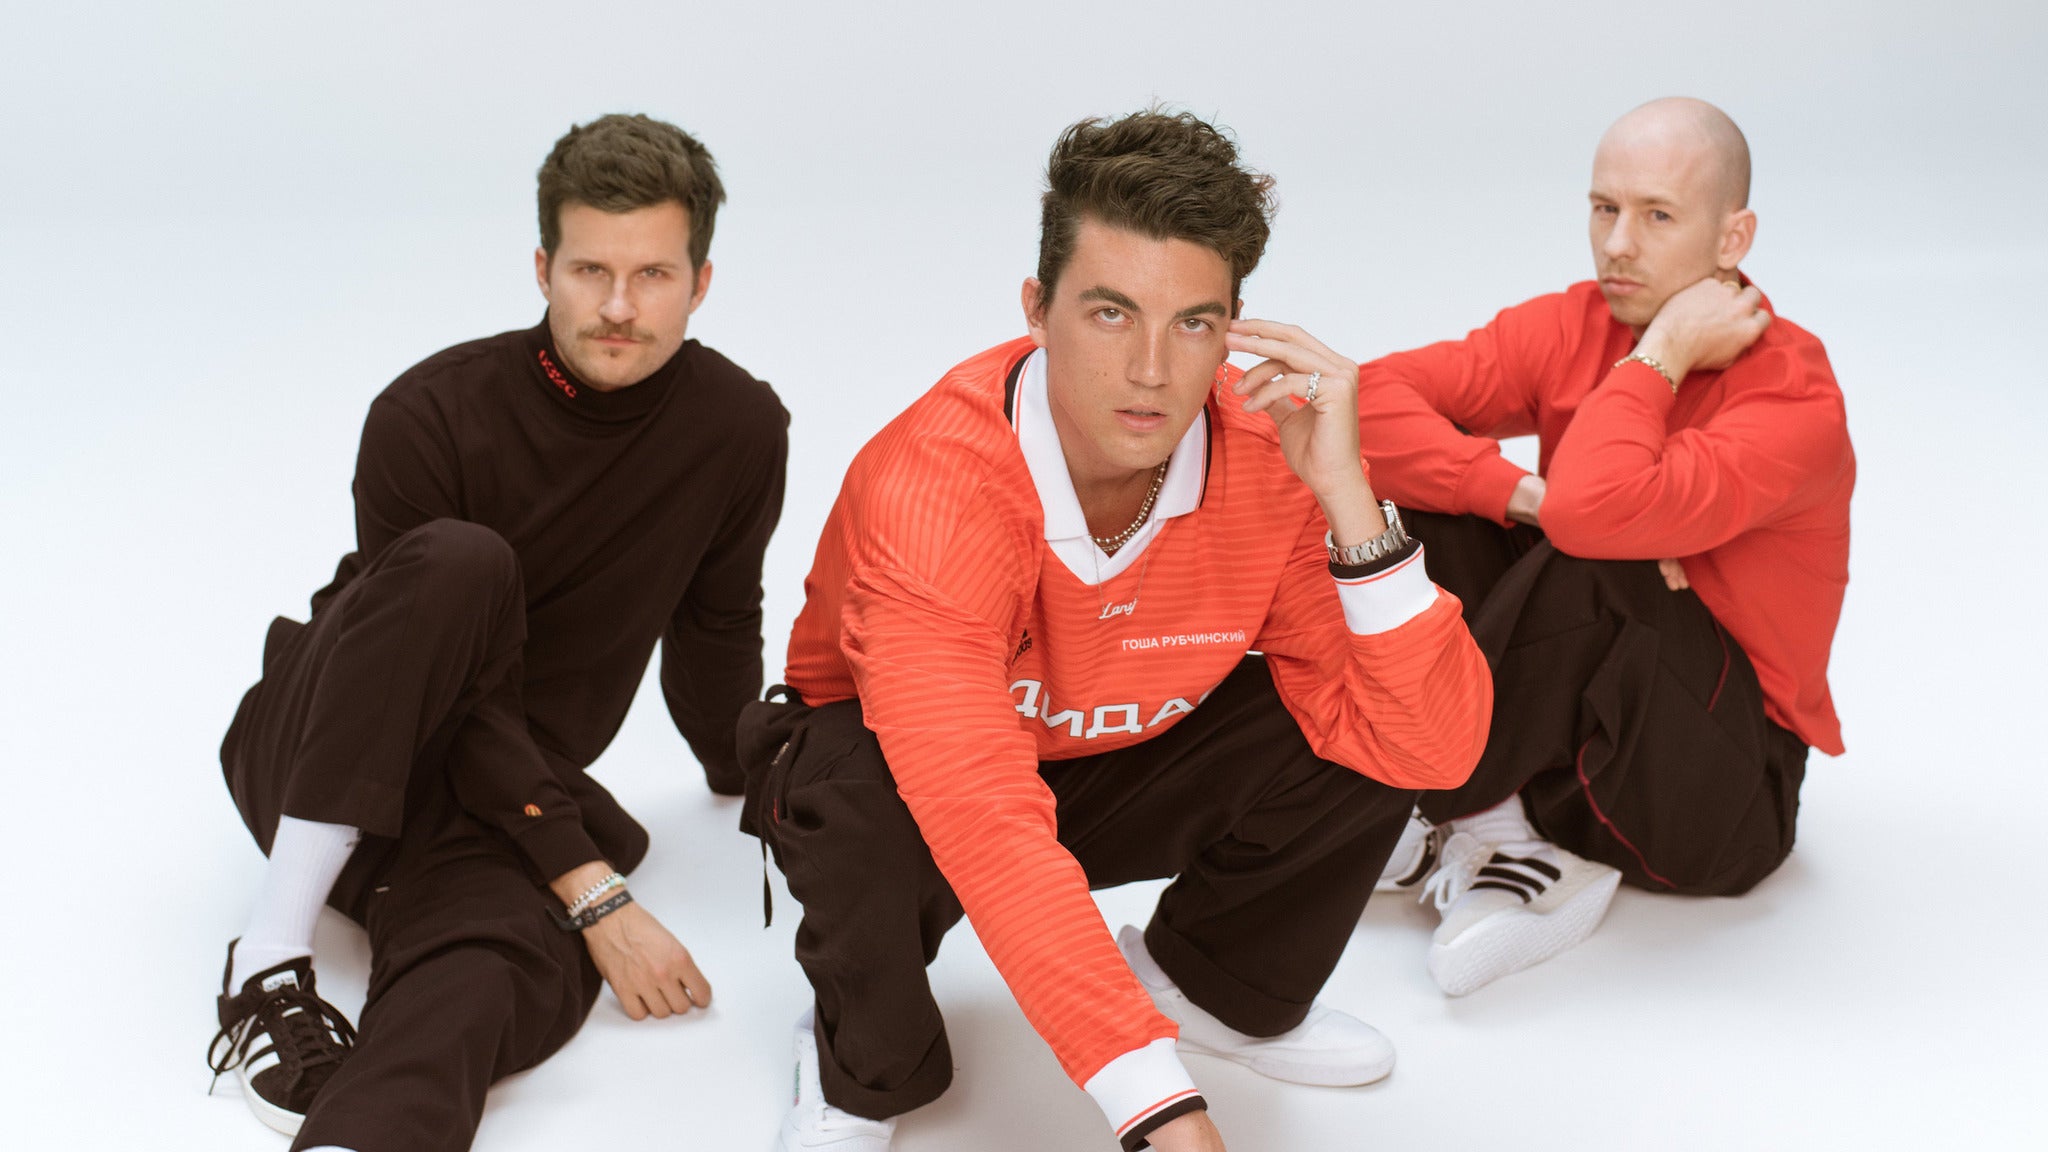 Ones to Watch Presents - THE LANY TOUR: PART 2 in Columbus promo photo for Ticketmaster presale offer code